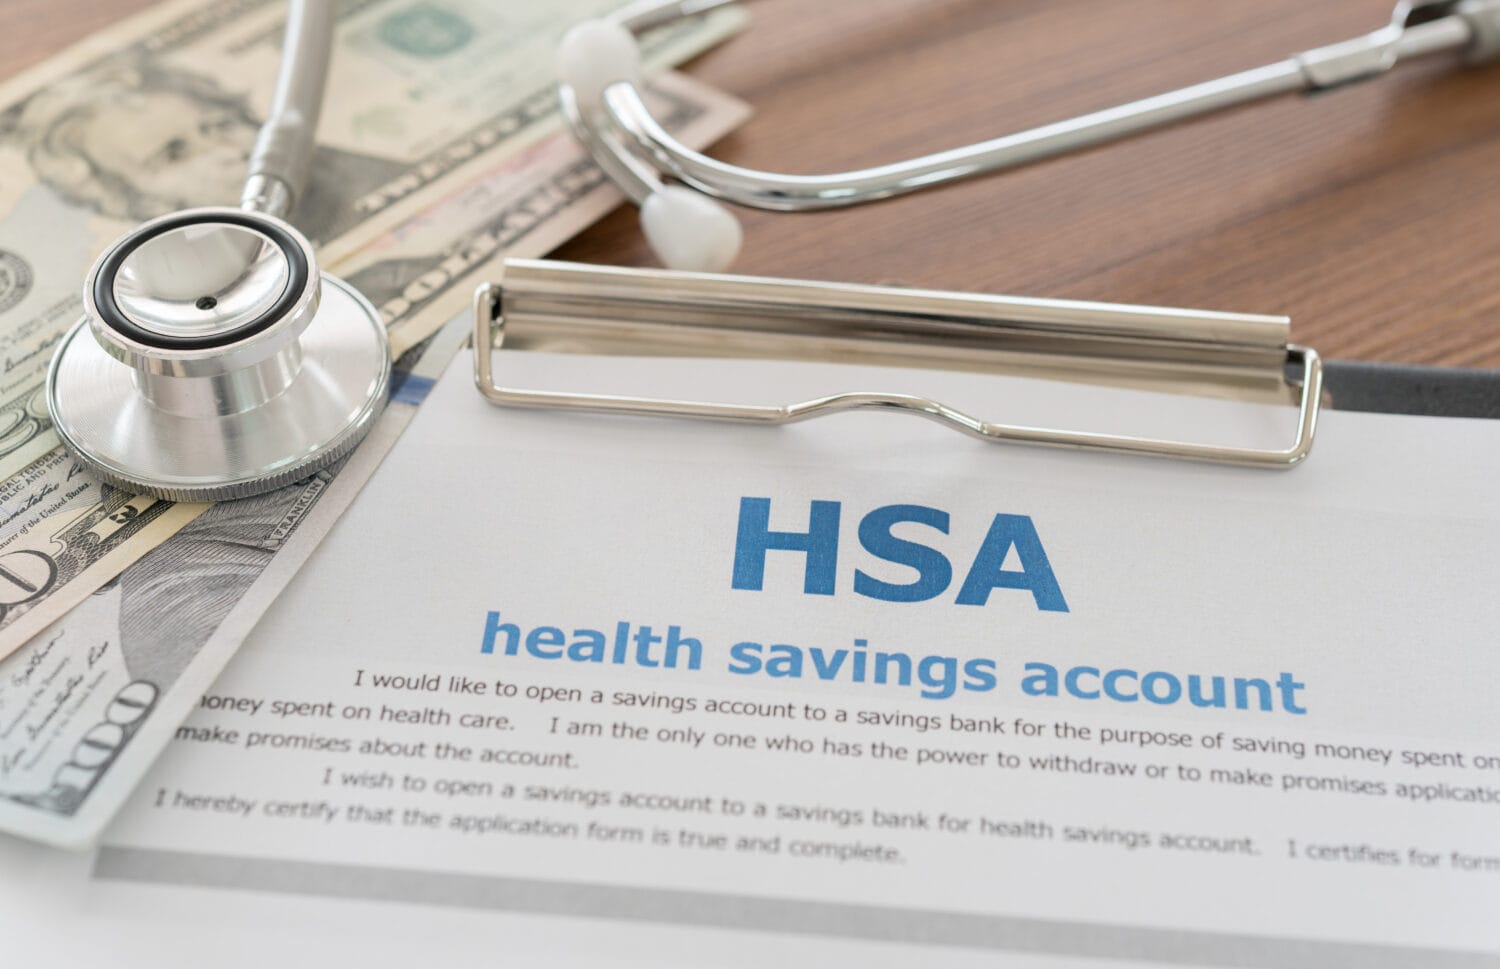 health savings account HSA concept with application form,dollar money, stethoscope on desk.